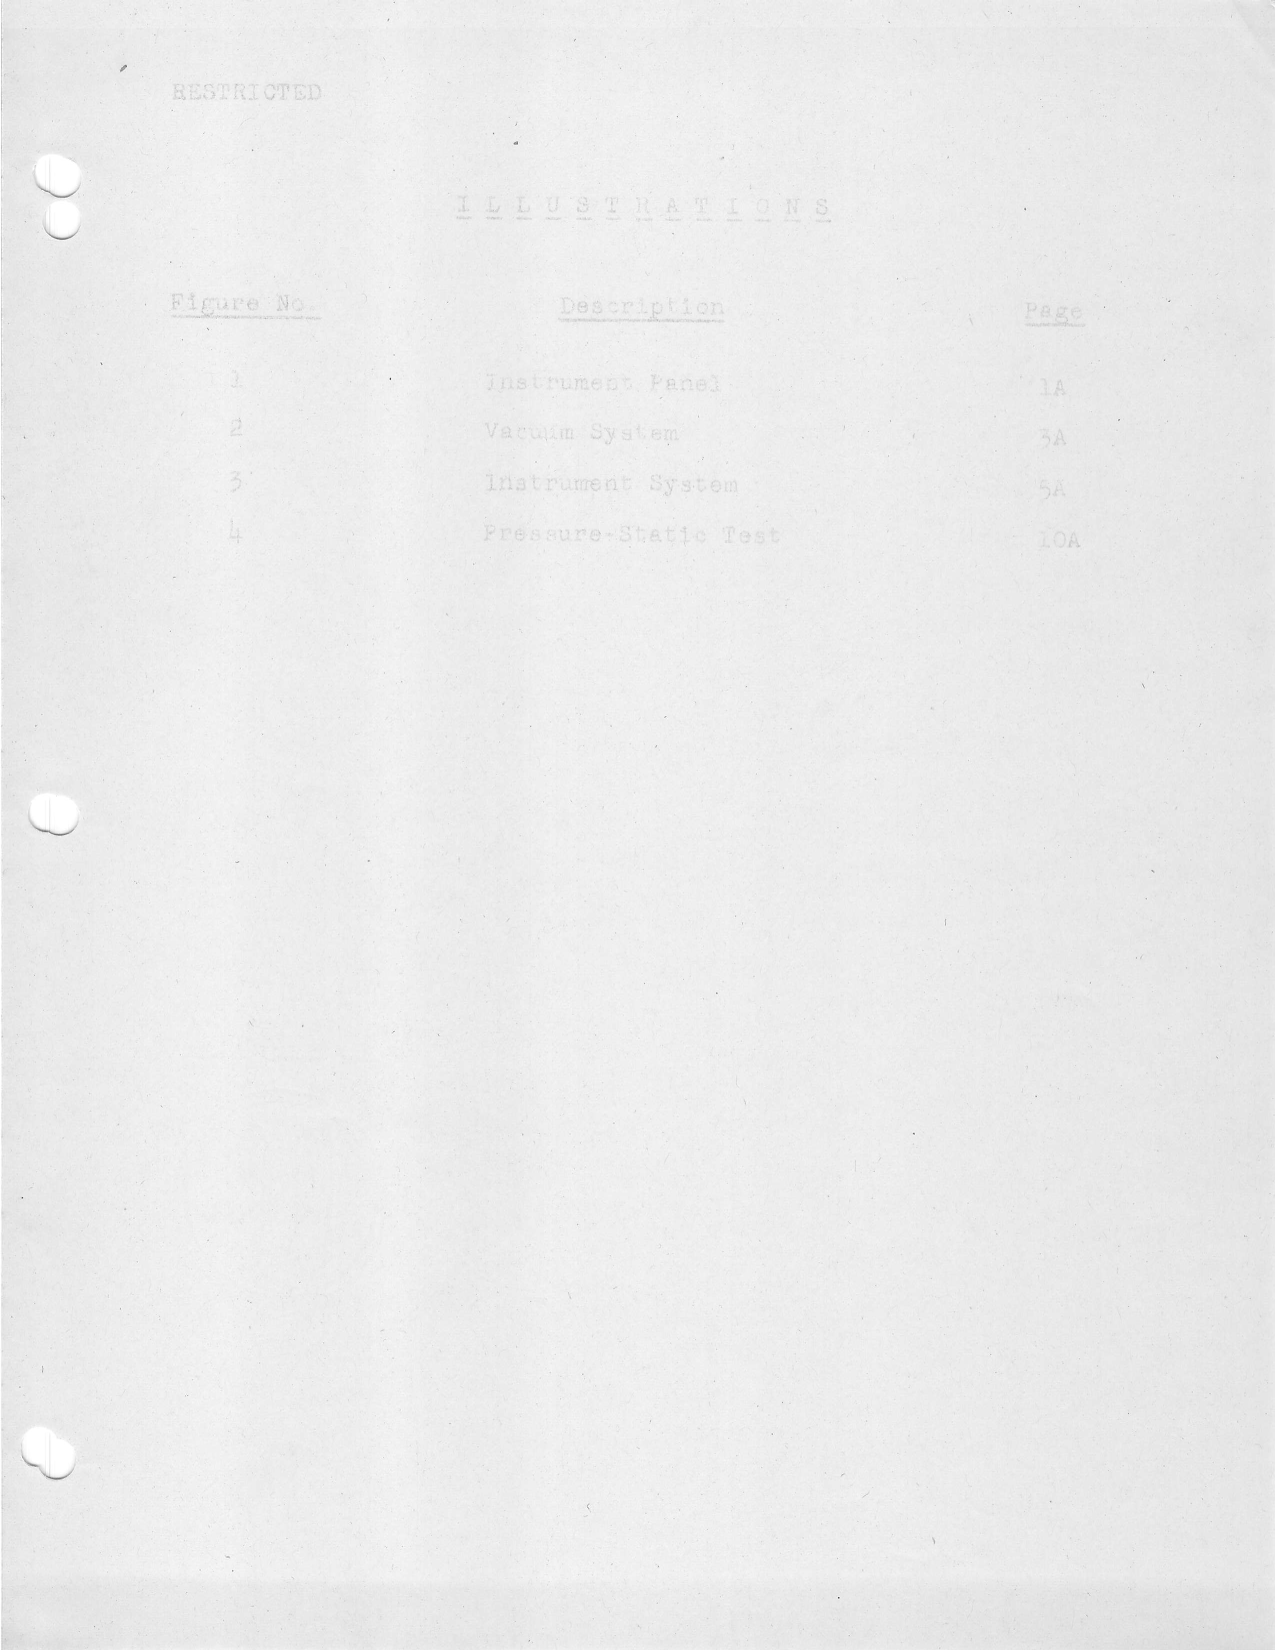 Sample page 251 from AirCorps Library document: Service School Lectures for P-51 Series Aircraft